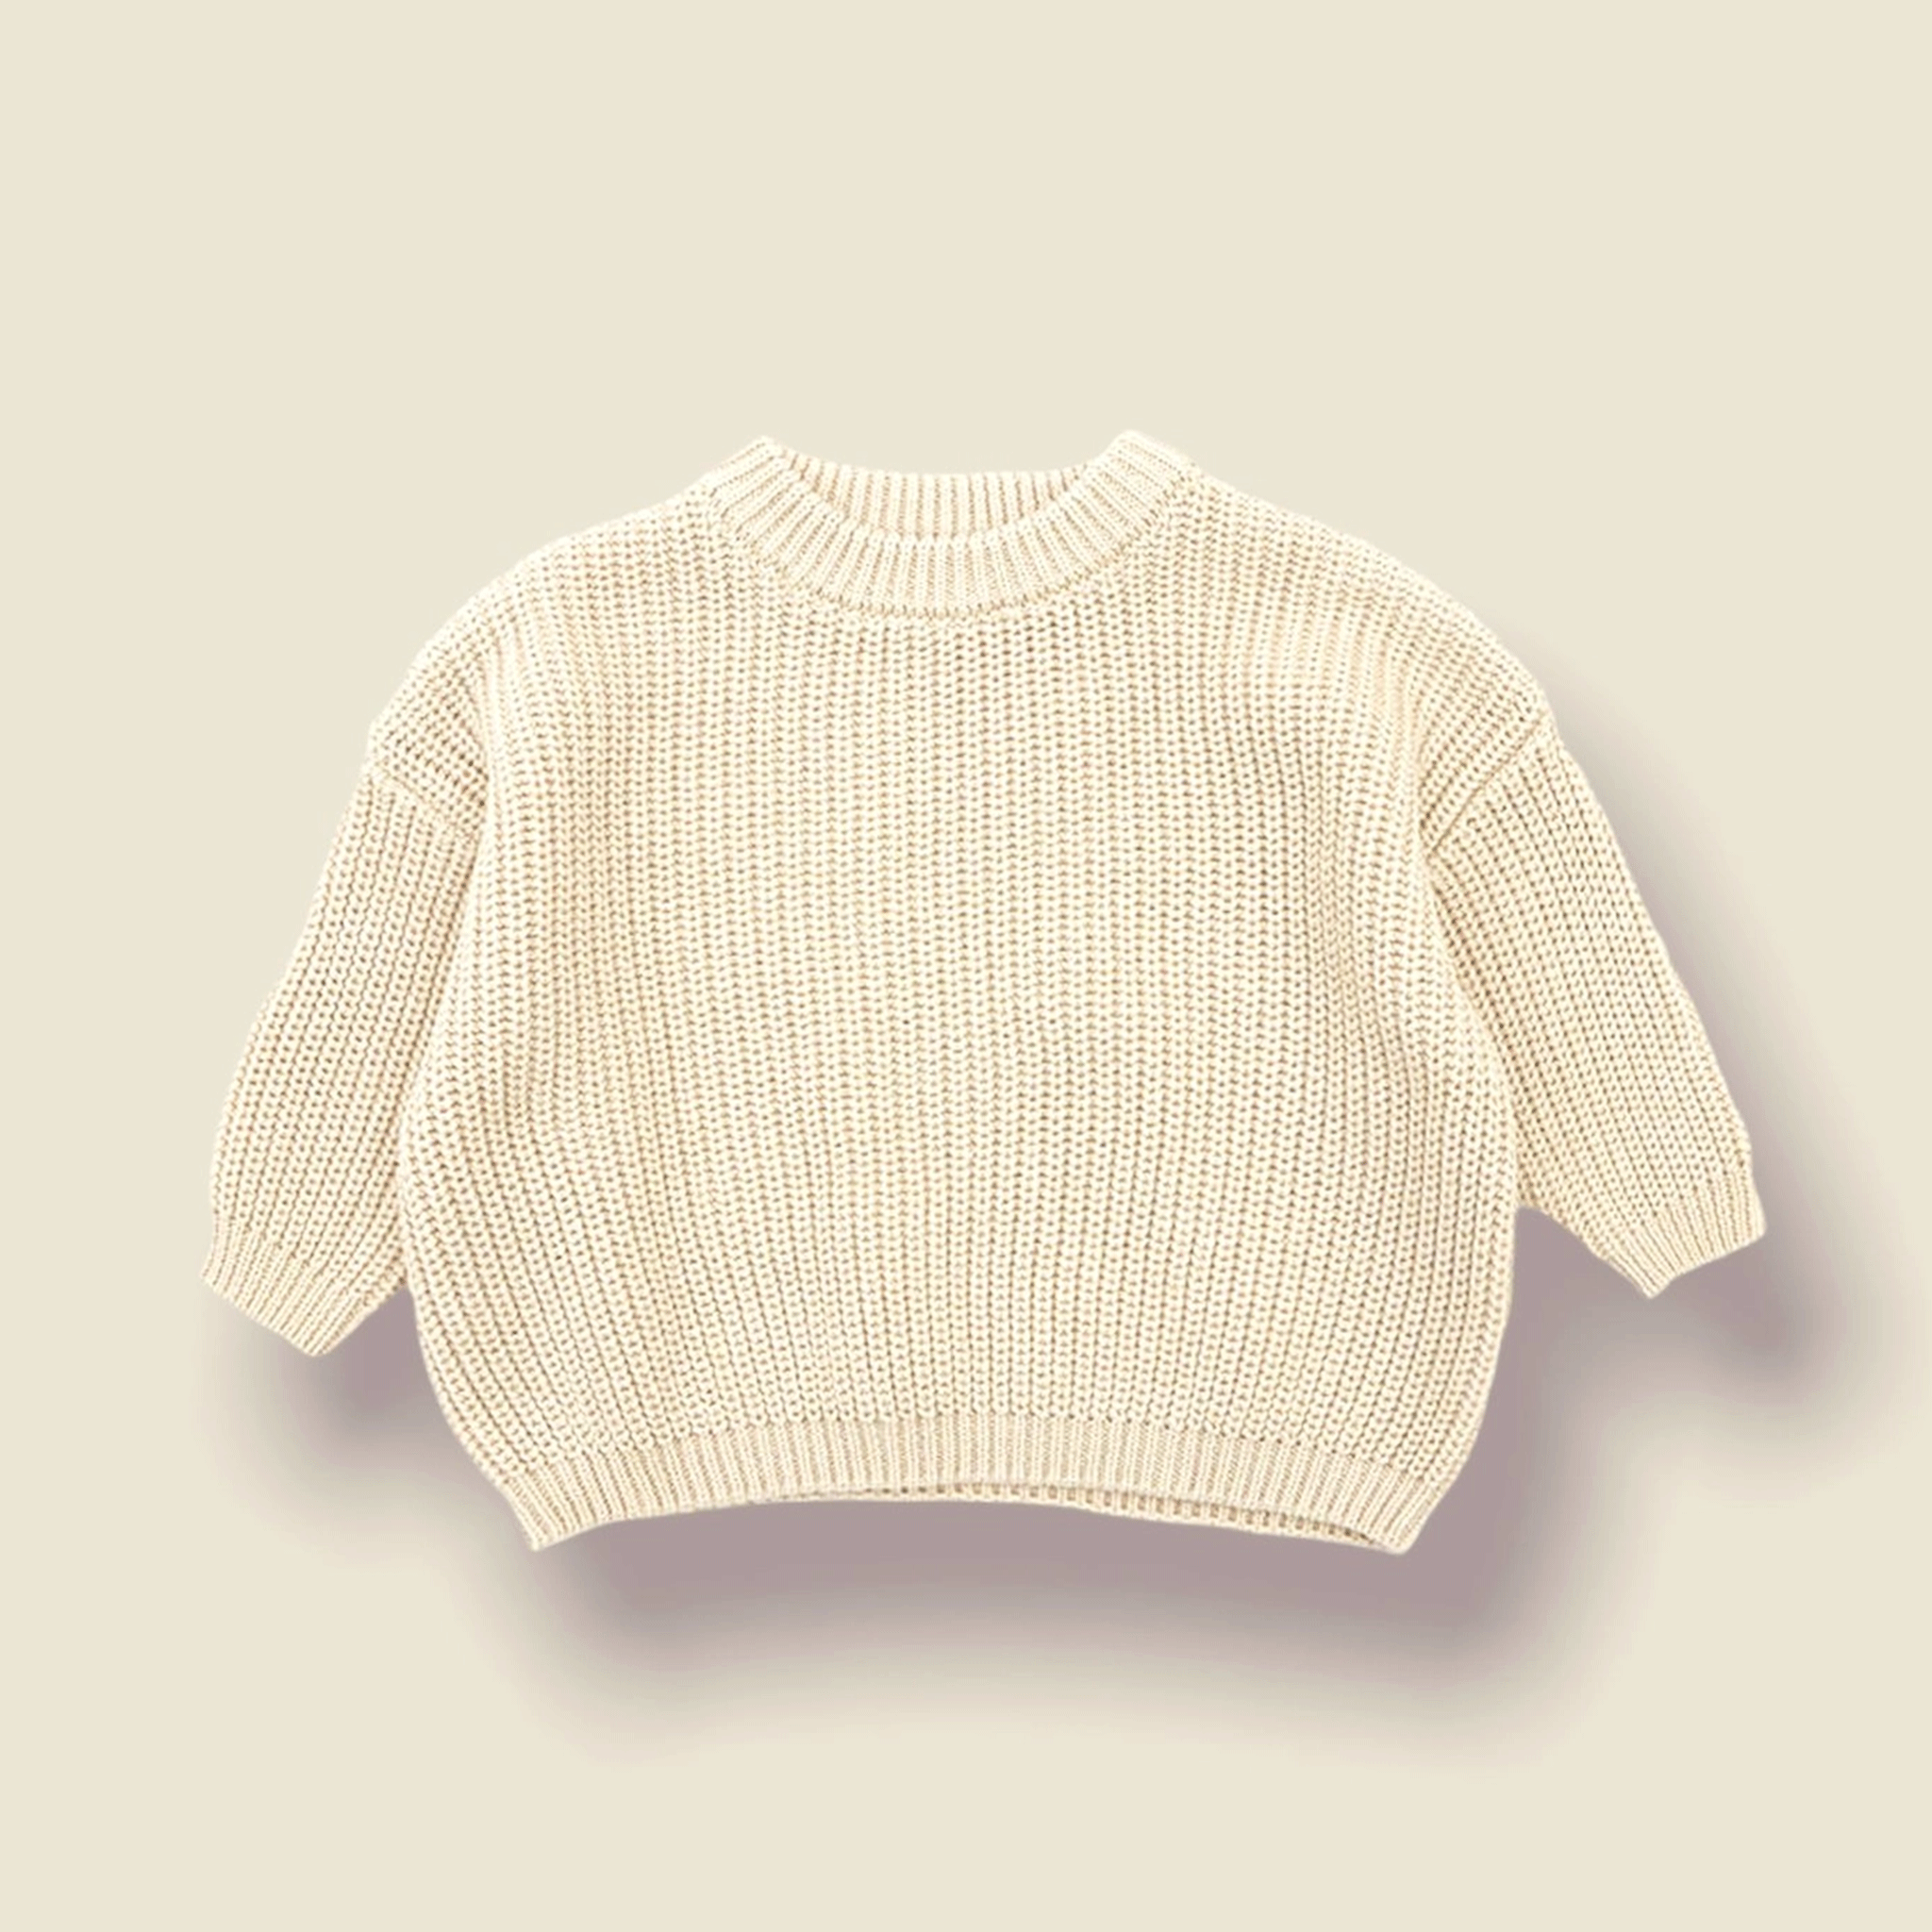 On a neutral background is an ivory knit sweater for children. 